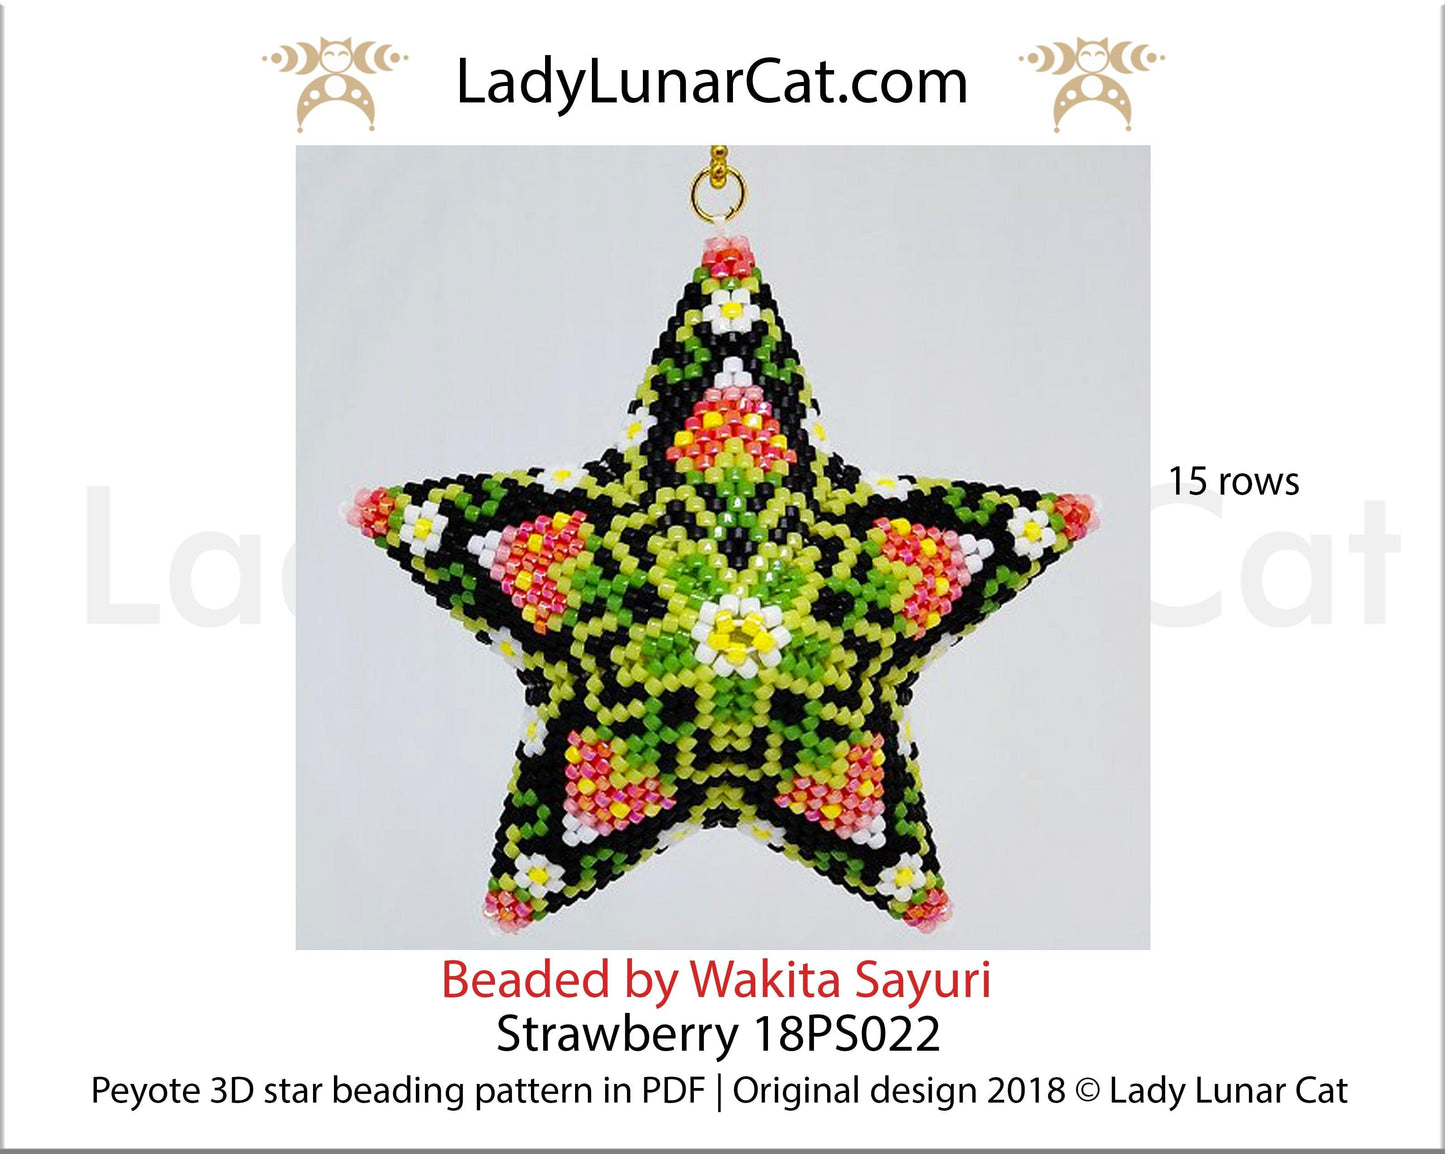 Beaded star pattern - Strawberry 18PS022 | Seed beads tutorial for 3D peyote star LadyLunarCat